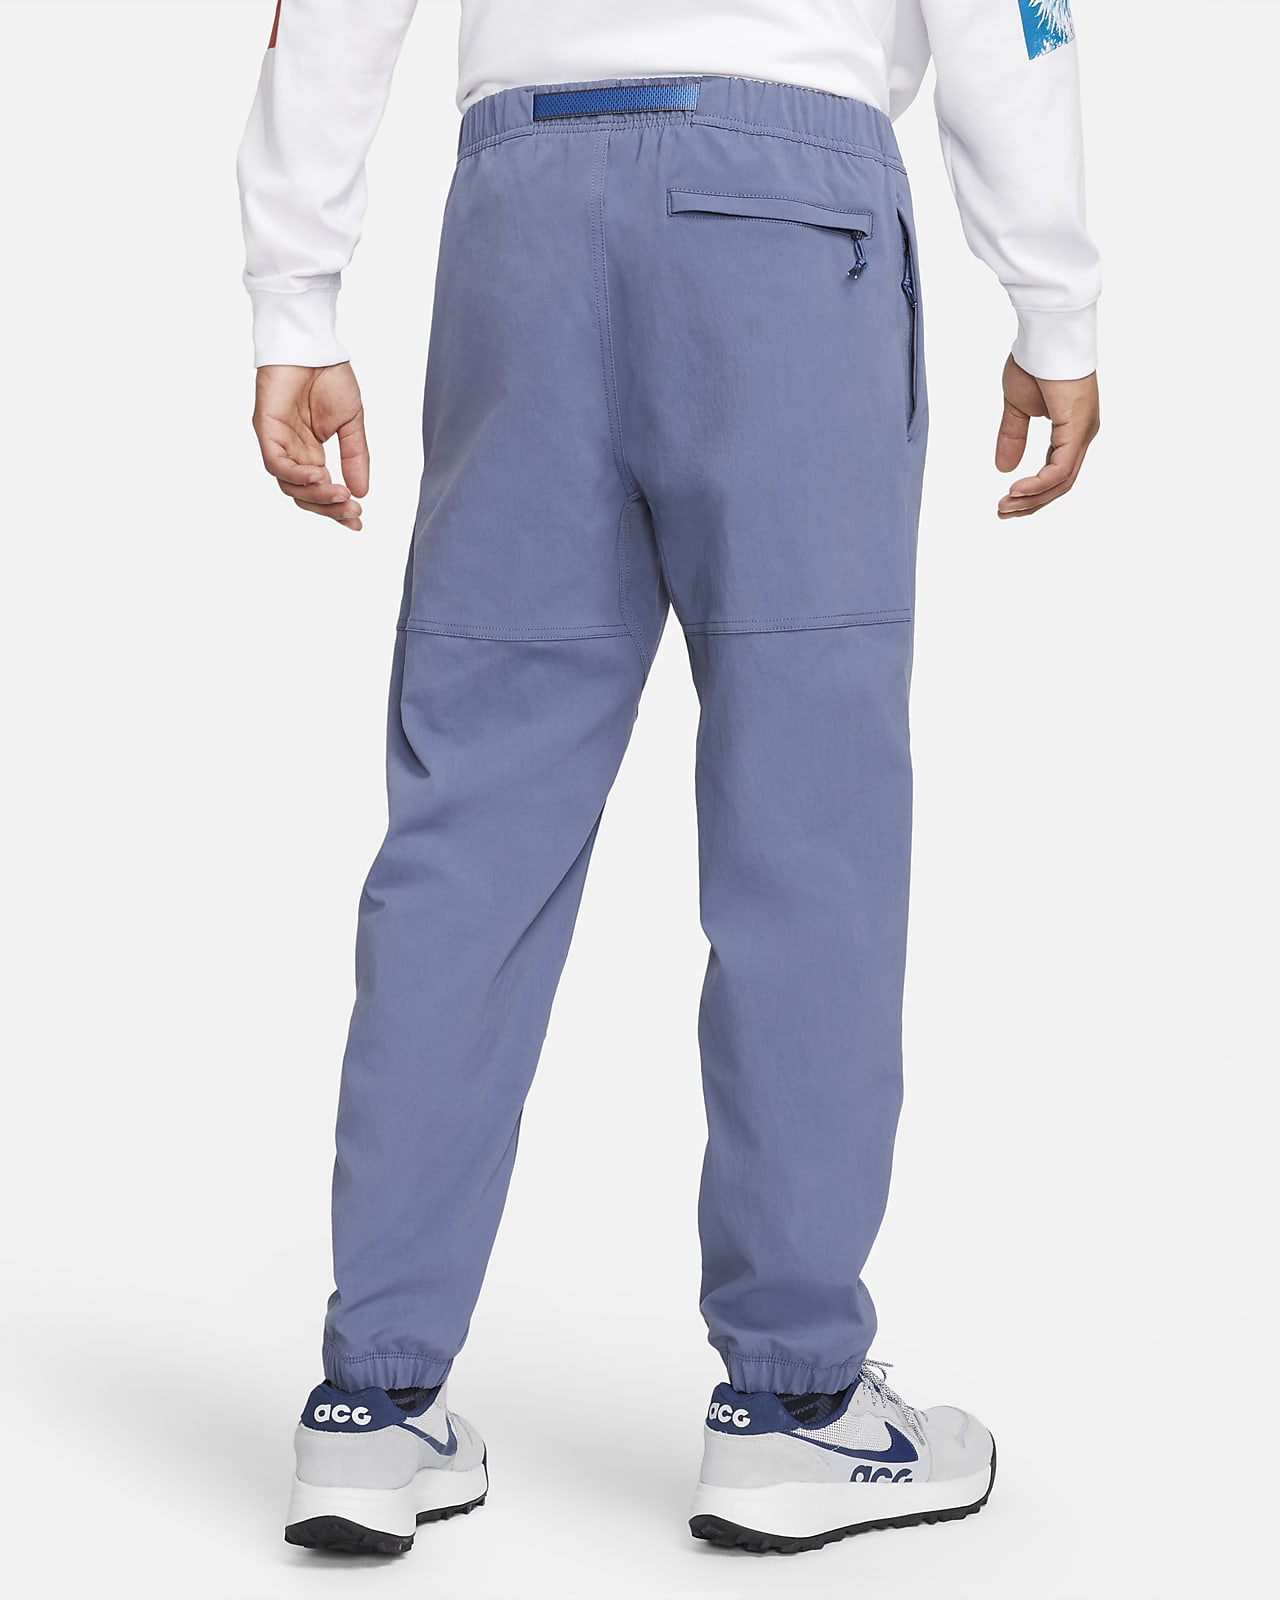 The Best Hiking Trousers for Men by Nike. Nike NL